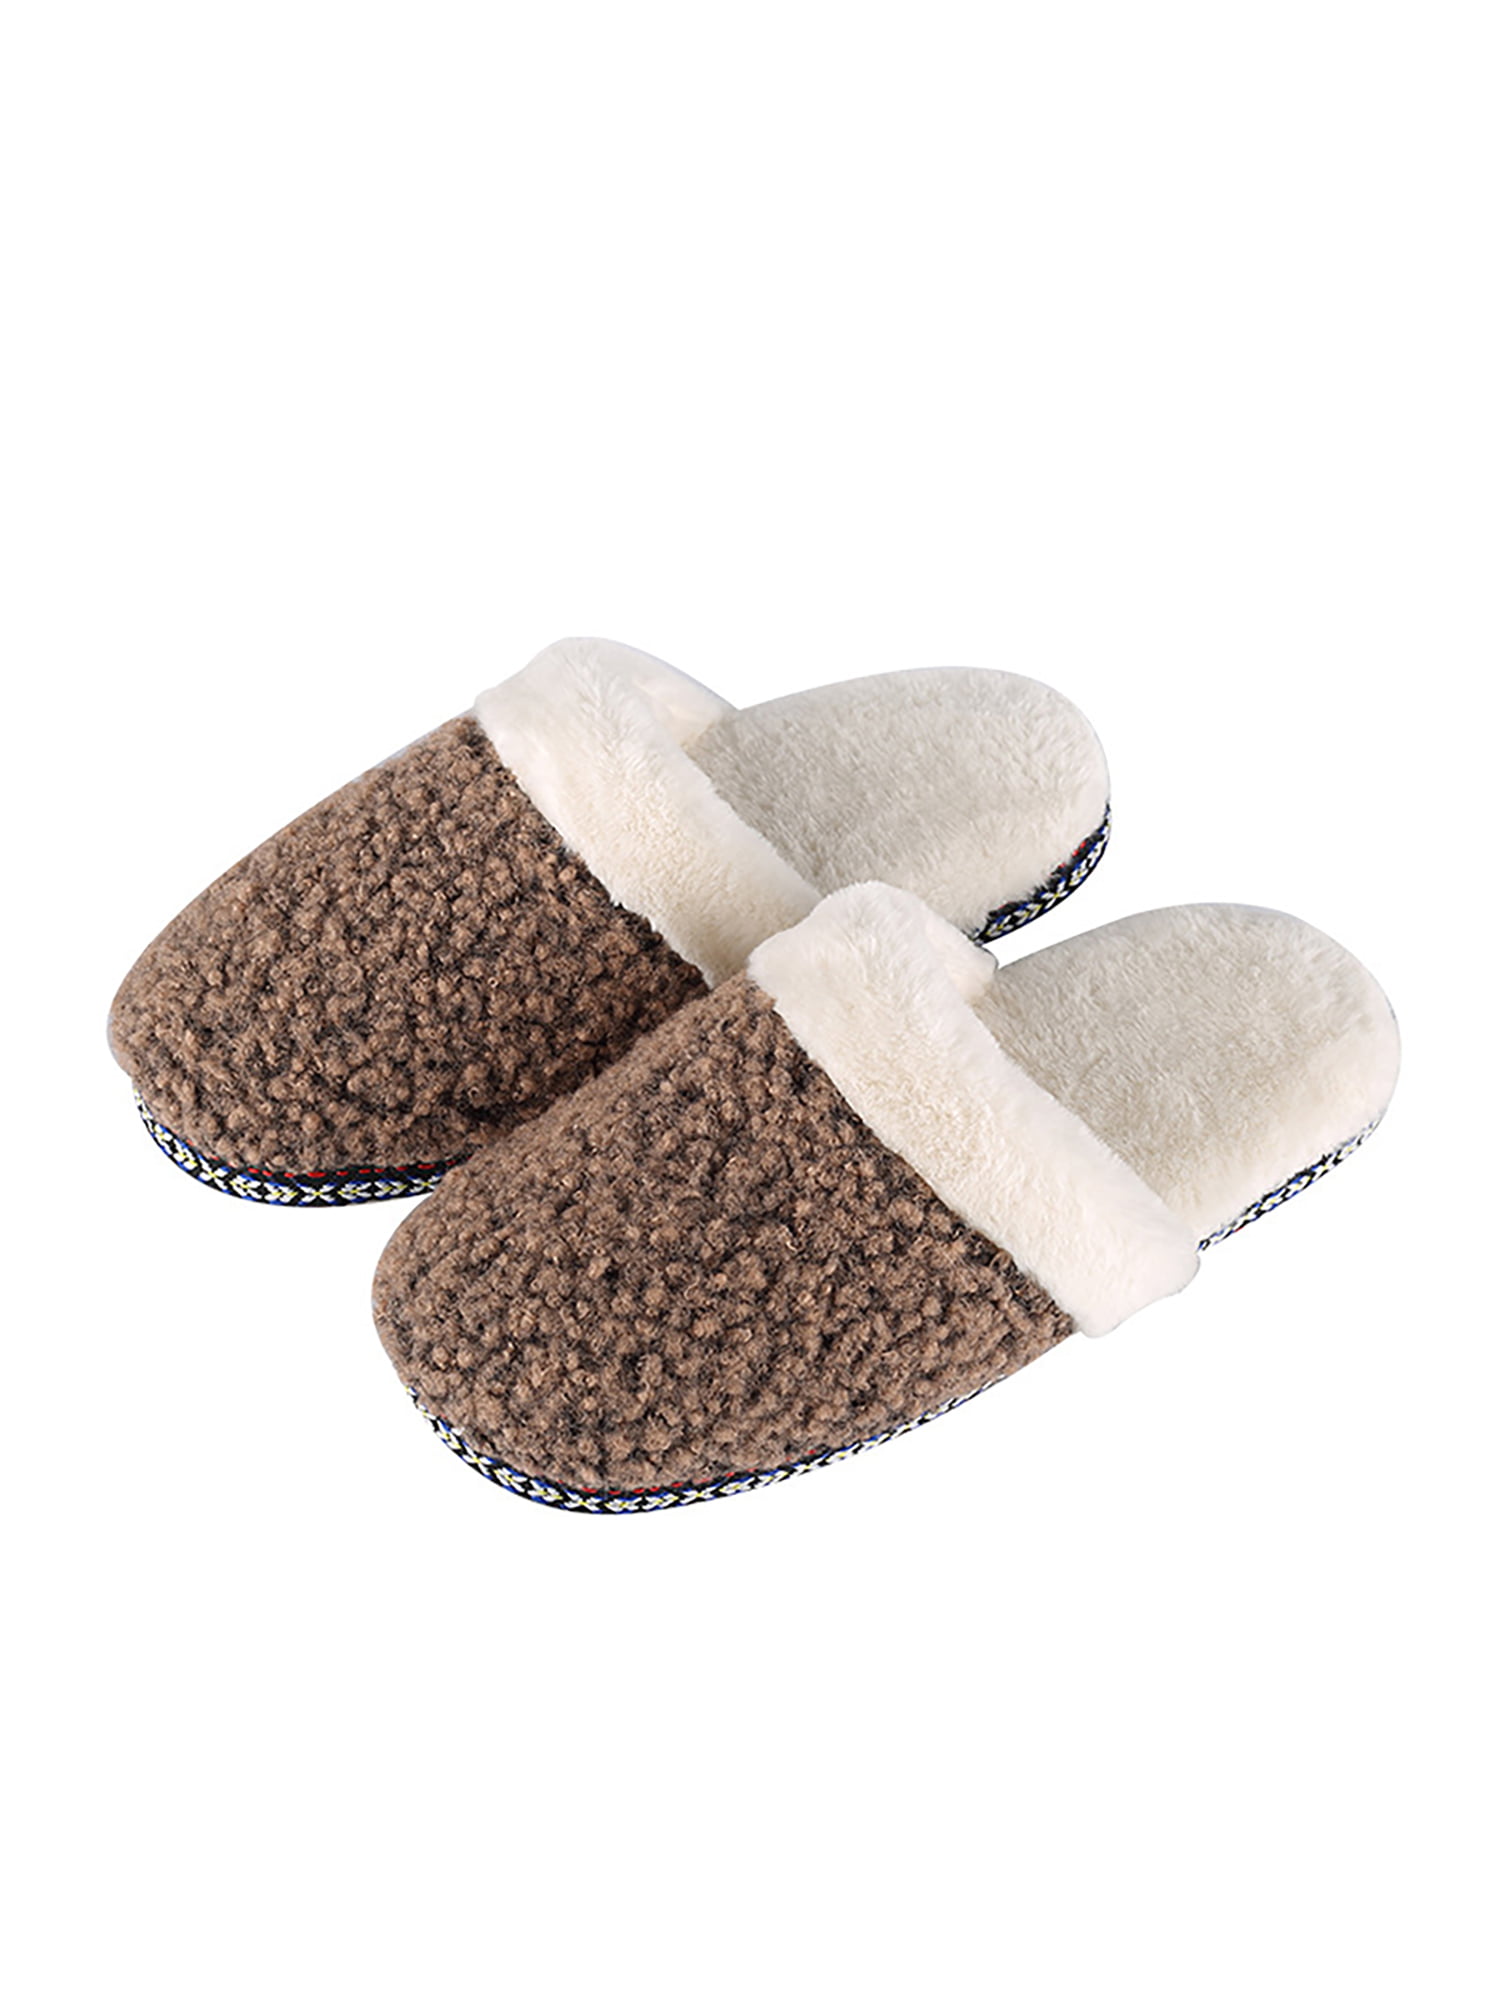 Details about   Warm Women Home Slippers Soft Short Plush Winter Long Indoor House Socks Shoes